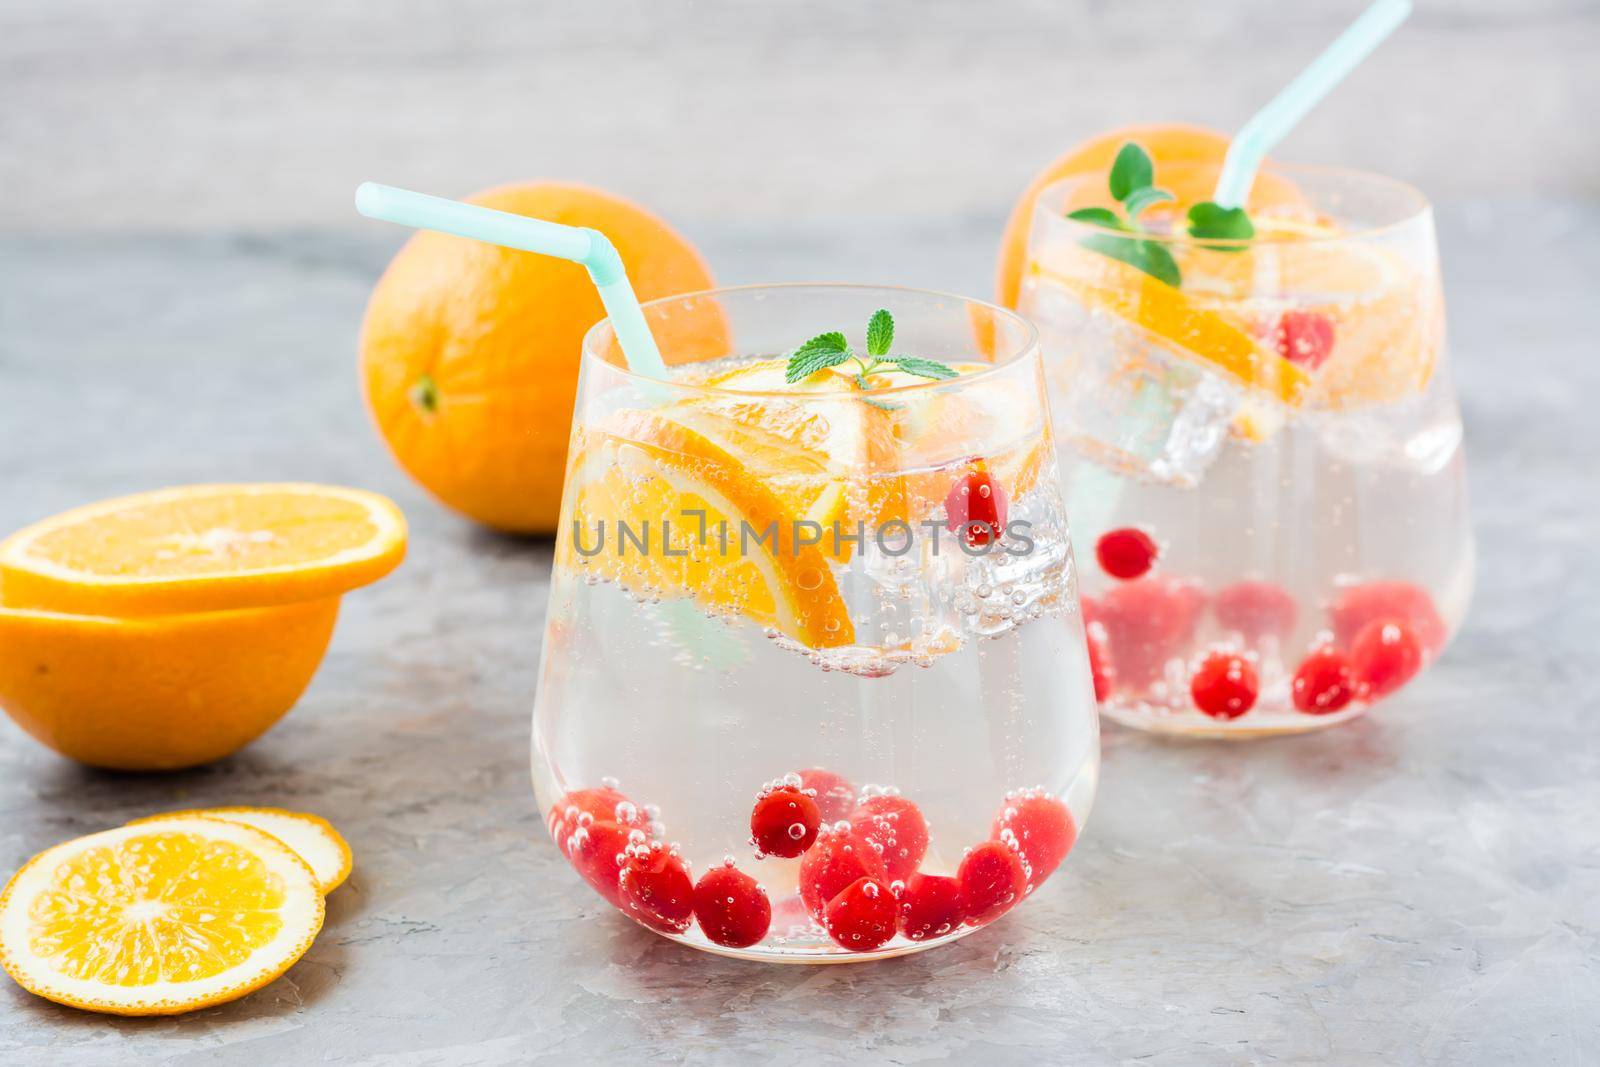 Hard seltzer cocktail with orange, cranberry and mint in glasses and cut oranges on the table. Alcoholic beverage by Aleruana